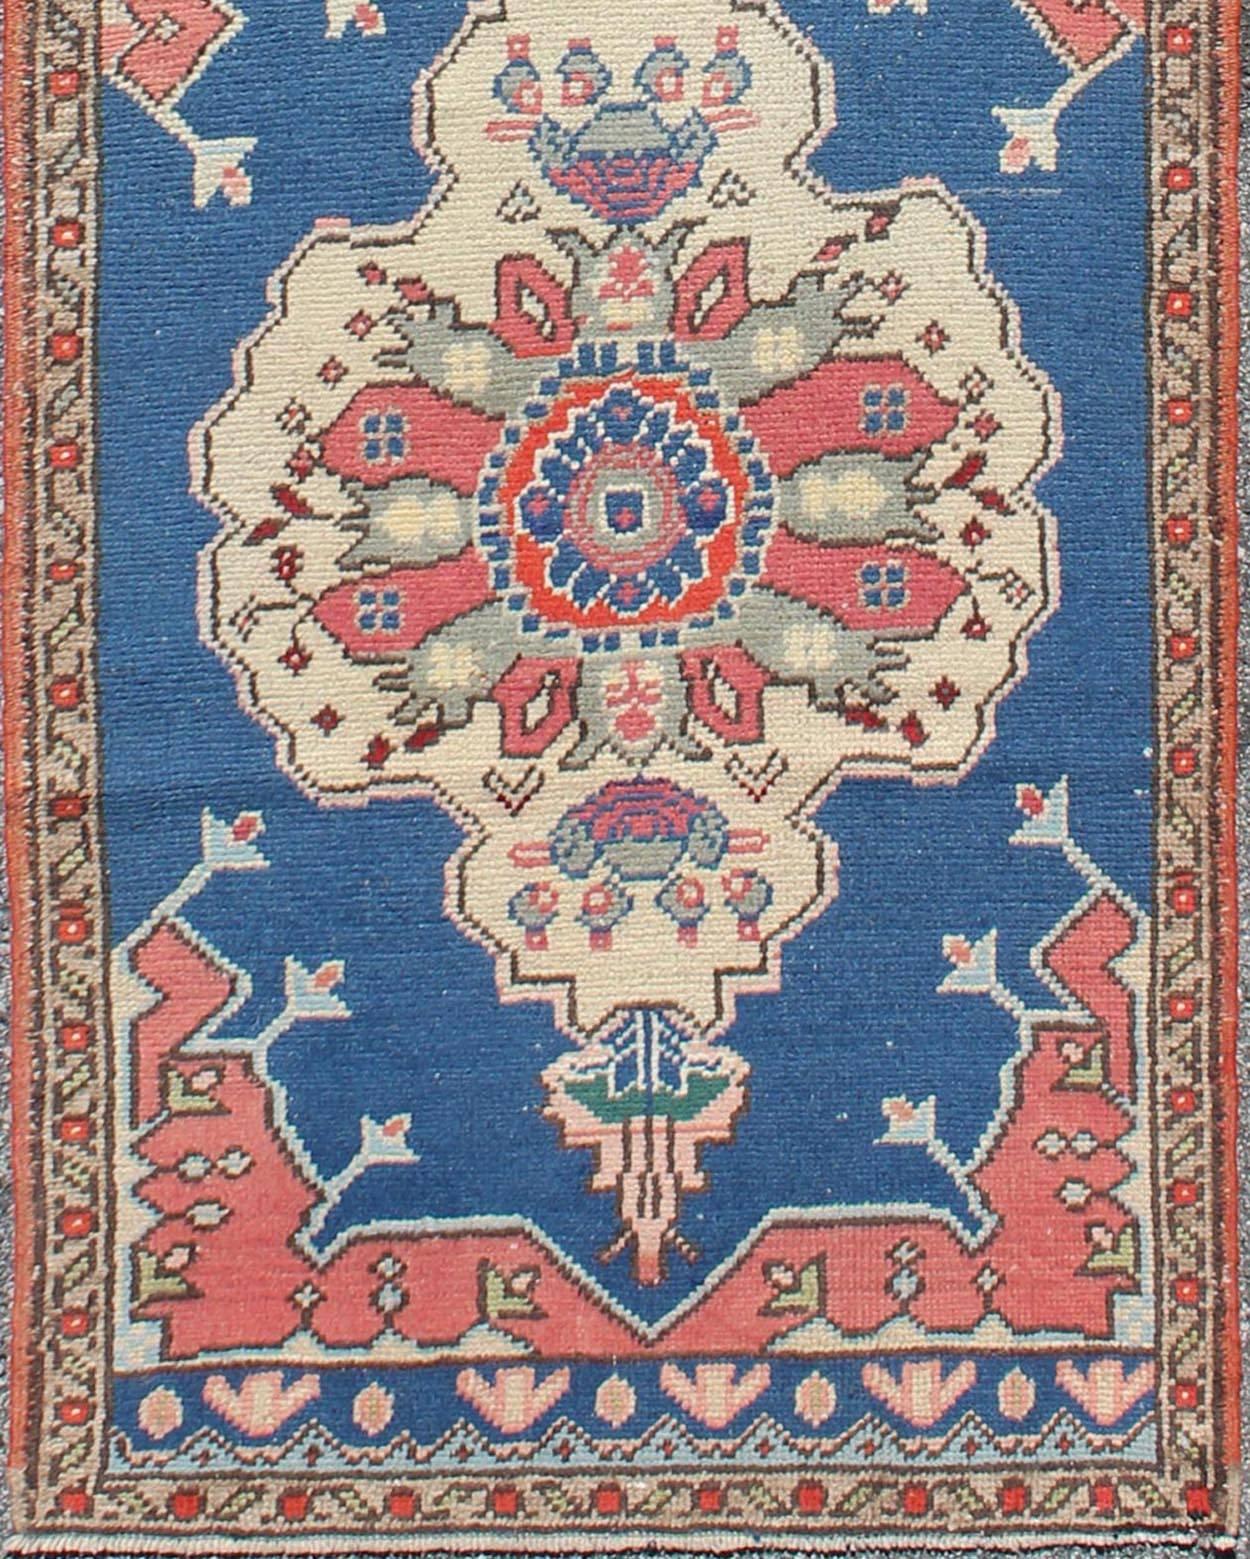 This Turkish runner features a dual central medallion design as well as patterns of smaller geometric and tribal elements. Colors include various shades of red, royal blue, ivory, and gray. Turkish Oushaks are notable for the grand, monumental scale